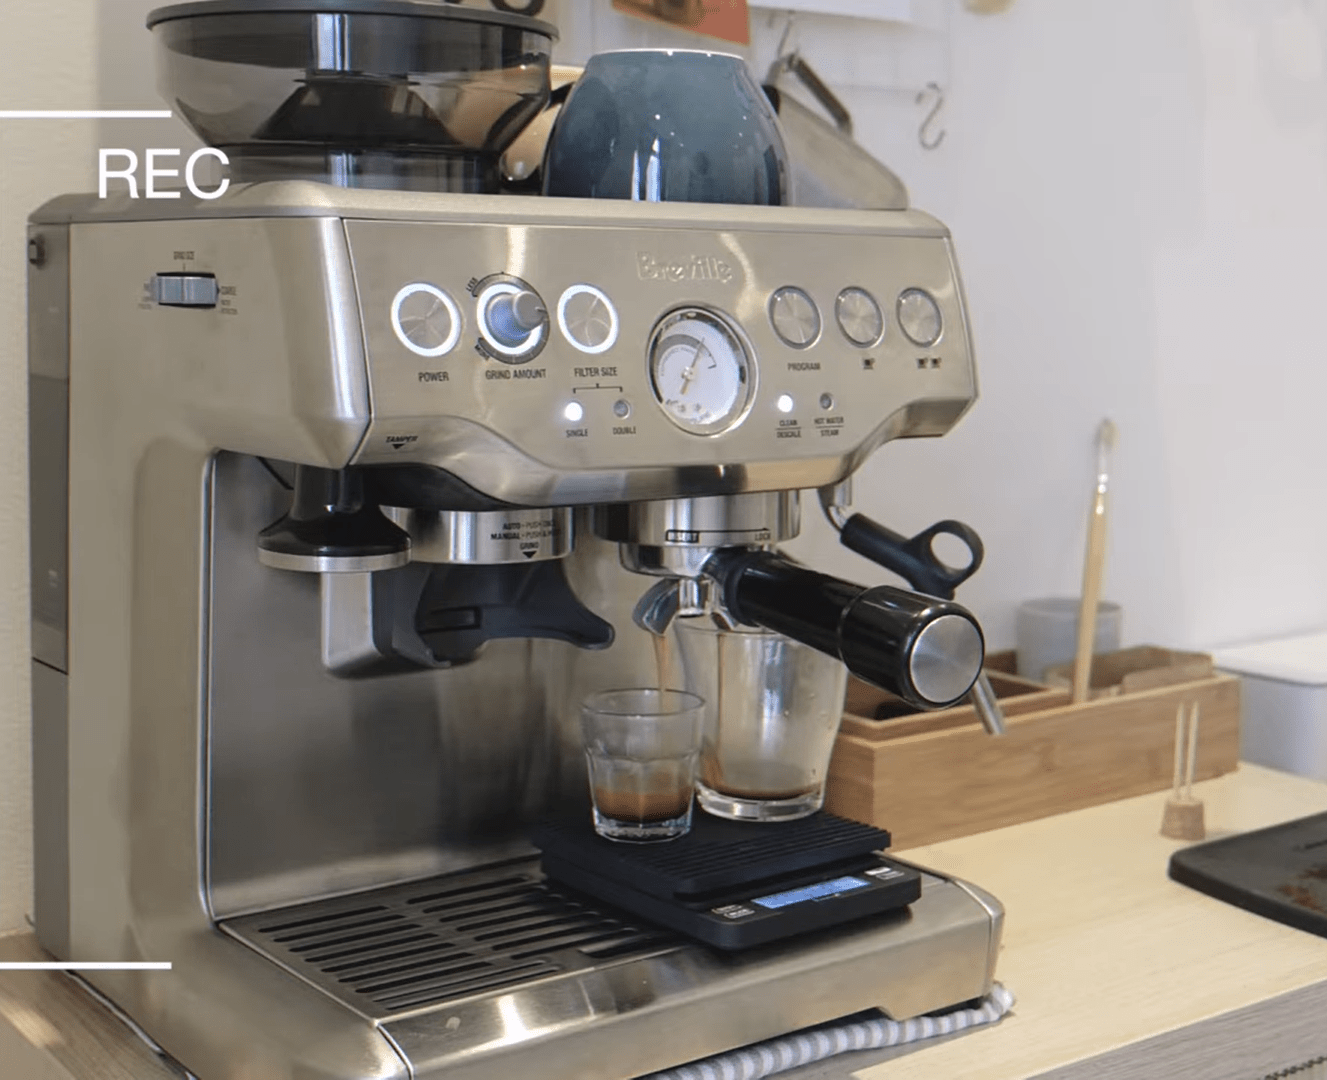 Barista Express is extracting coffee